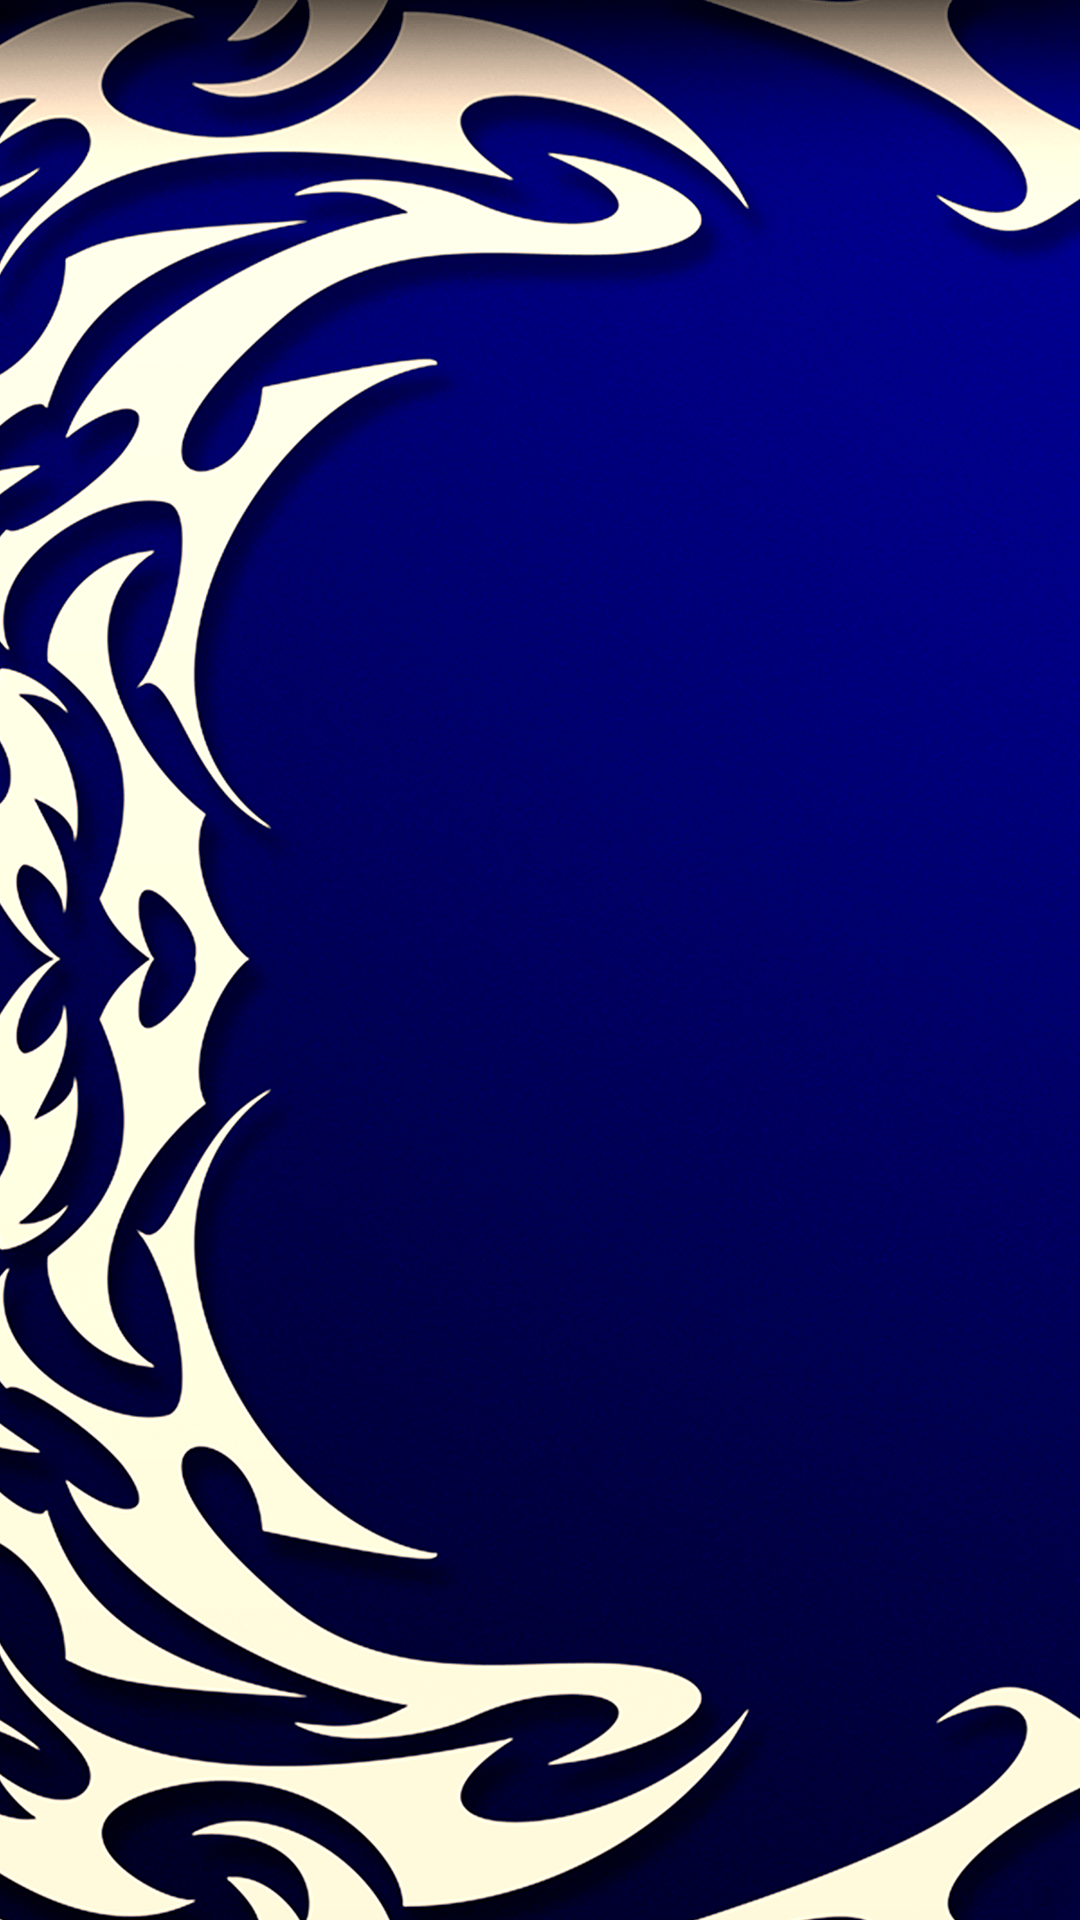 Download Our HD Tribal Blue Wallpaper For Android Phones .0554